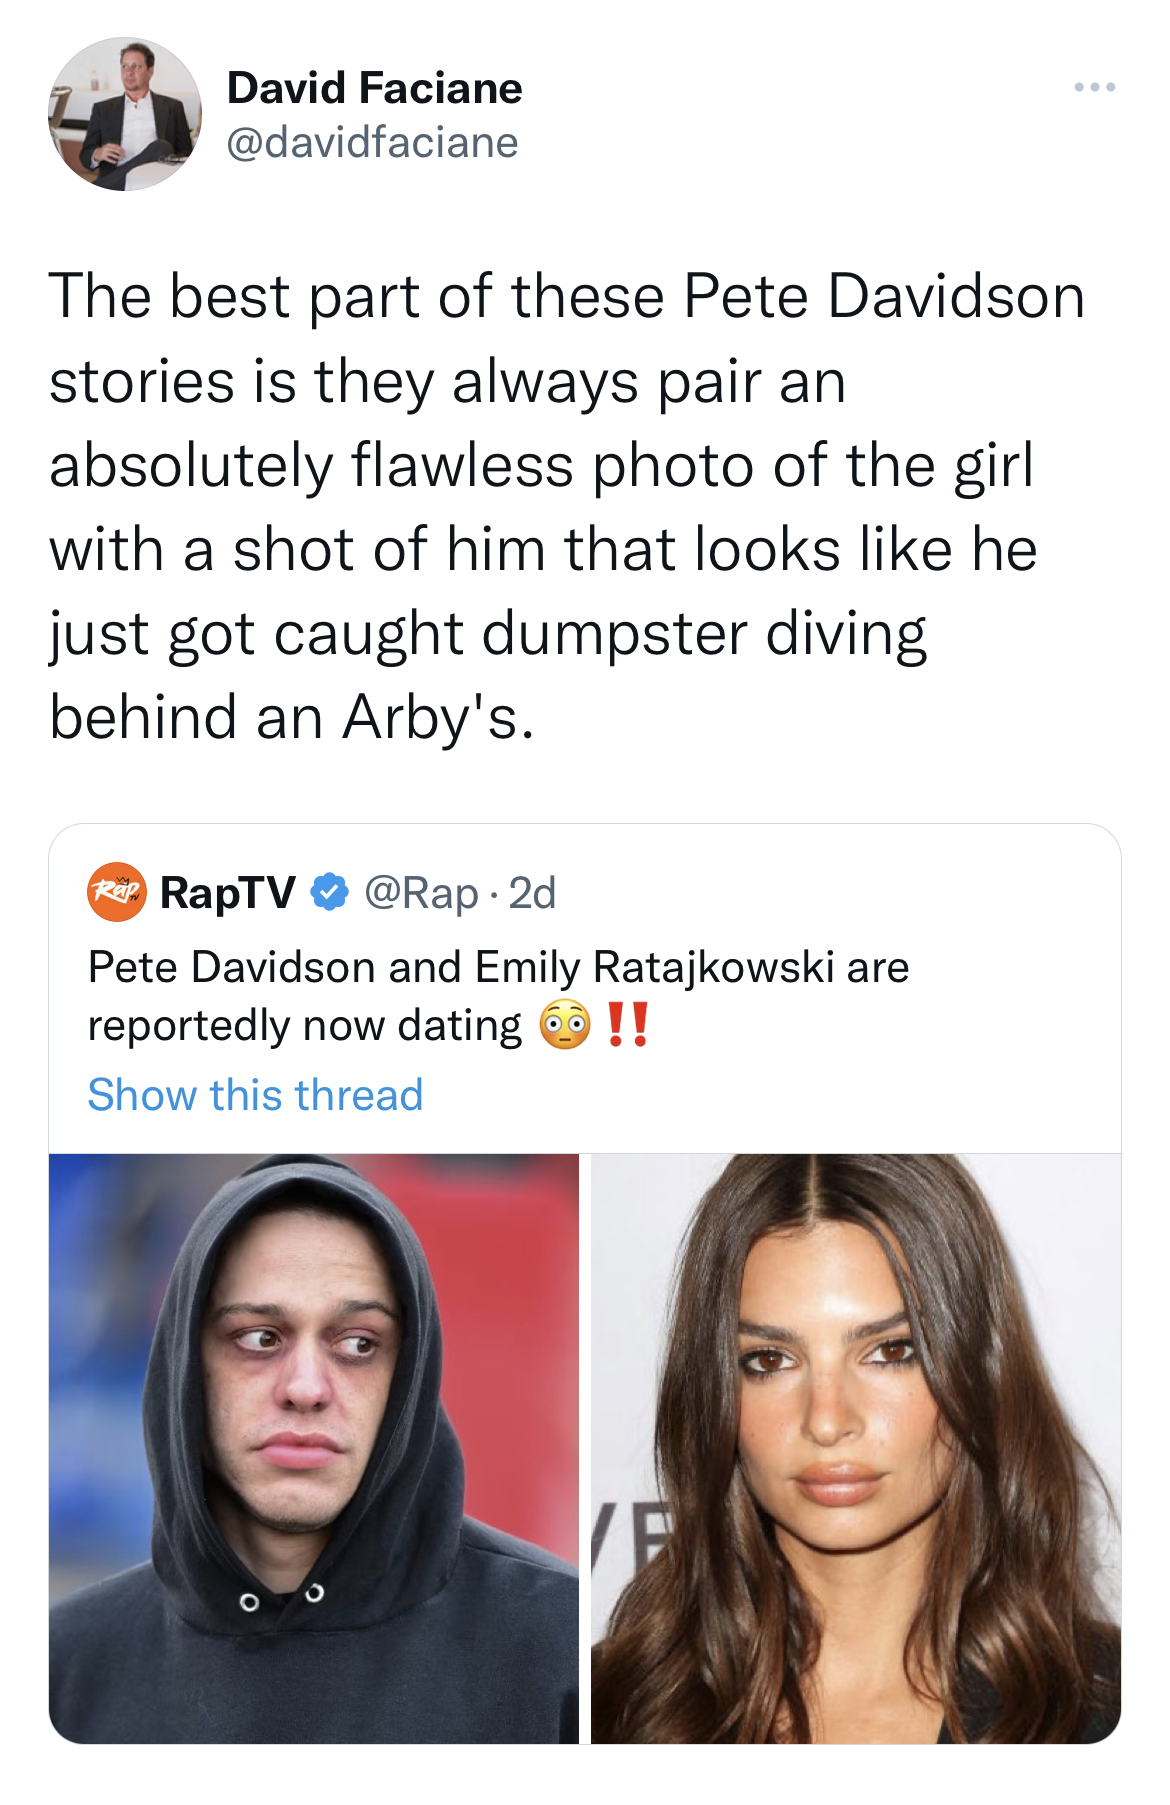 Tweets roasting celebrities - head - David Faciane The best part of these Pete Davidson stories is they always pair an absolutely flawless photo of the girl with a shot of him that looks he just got caught dumpster diving behind an Arby's. RapTV Pete Davi